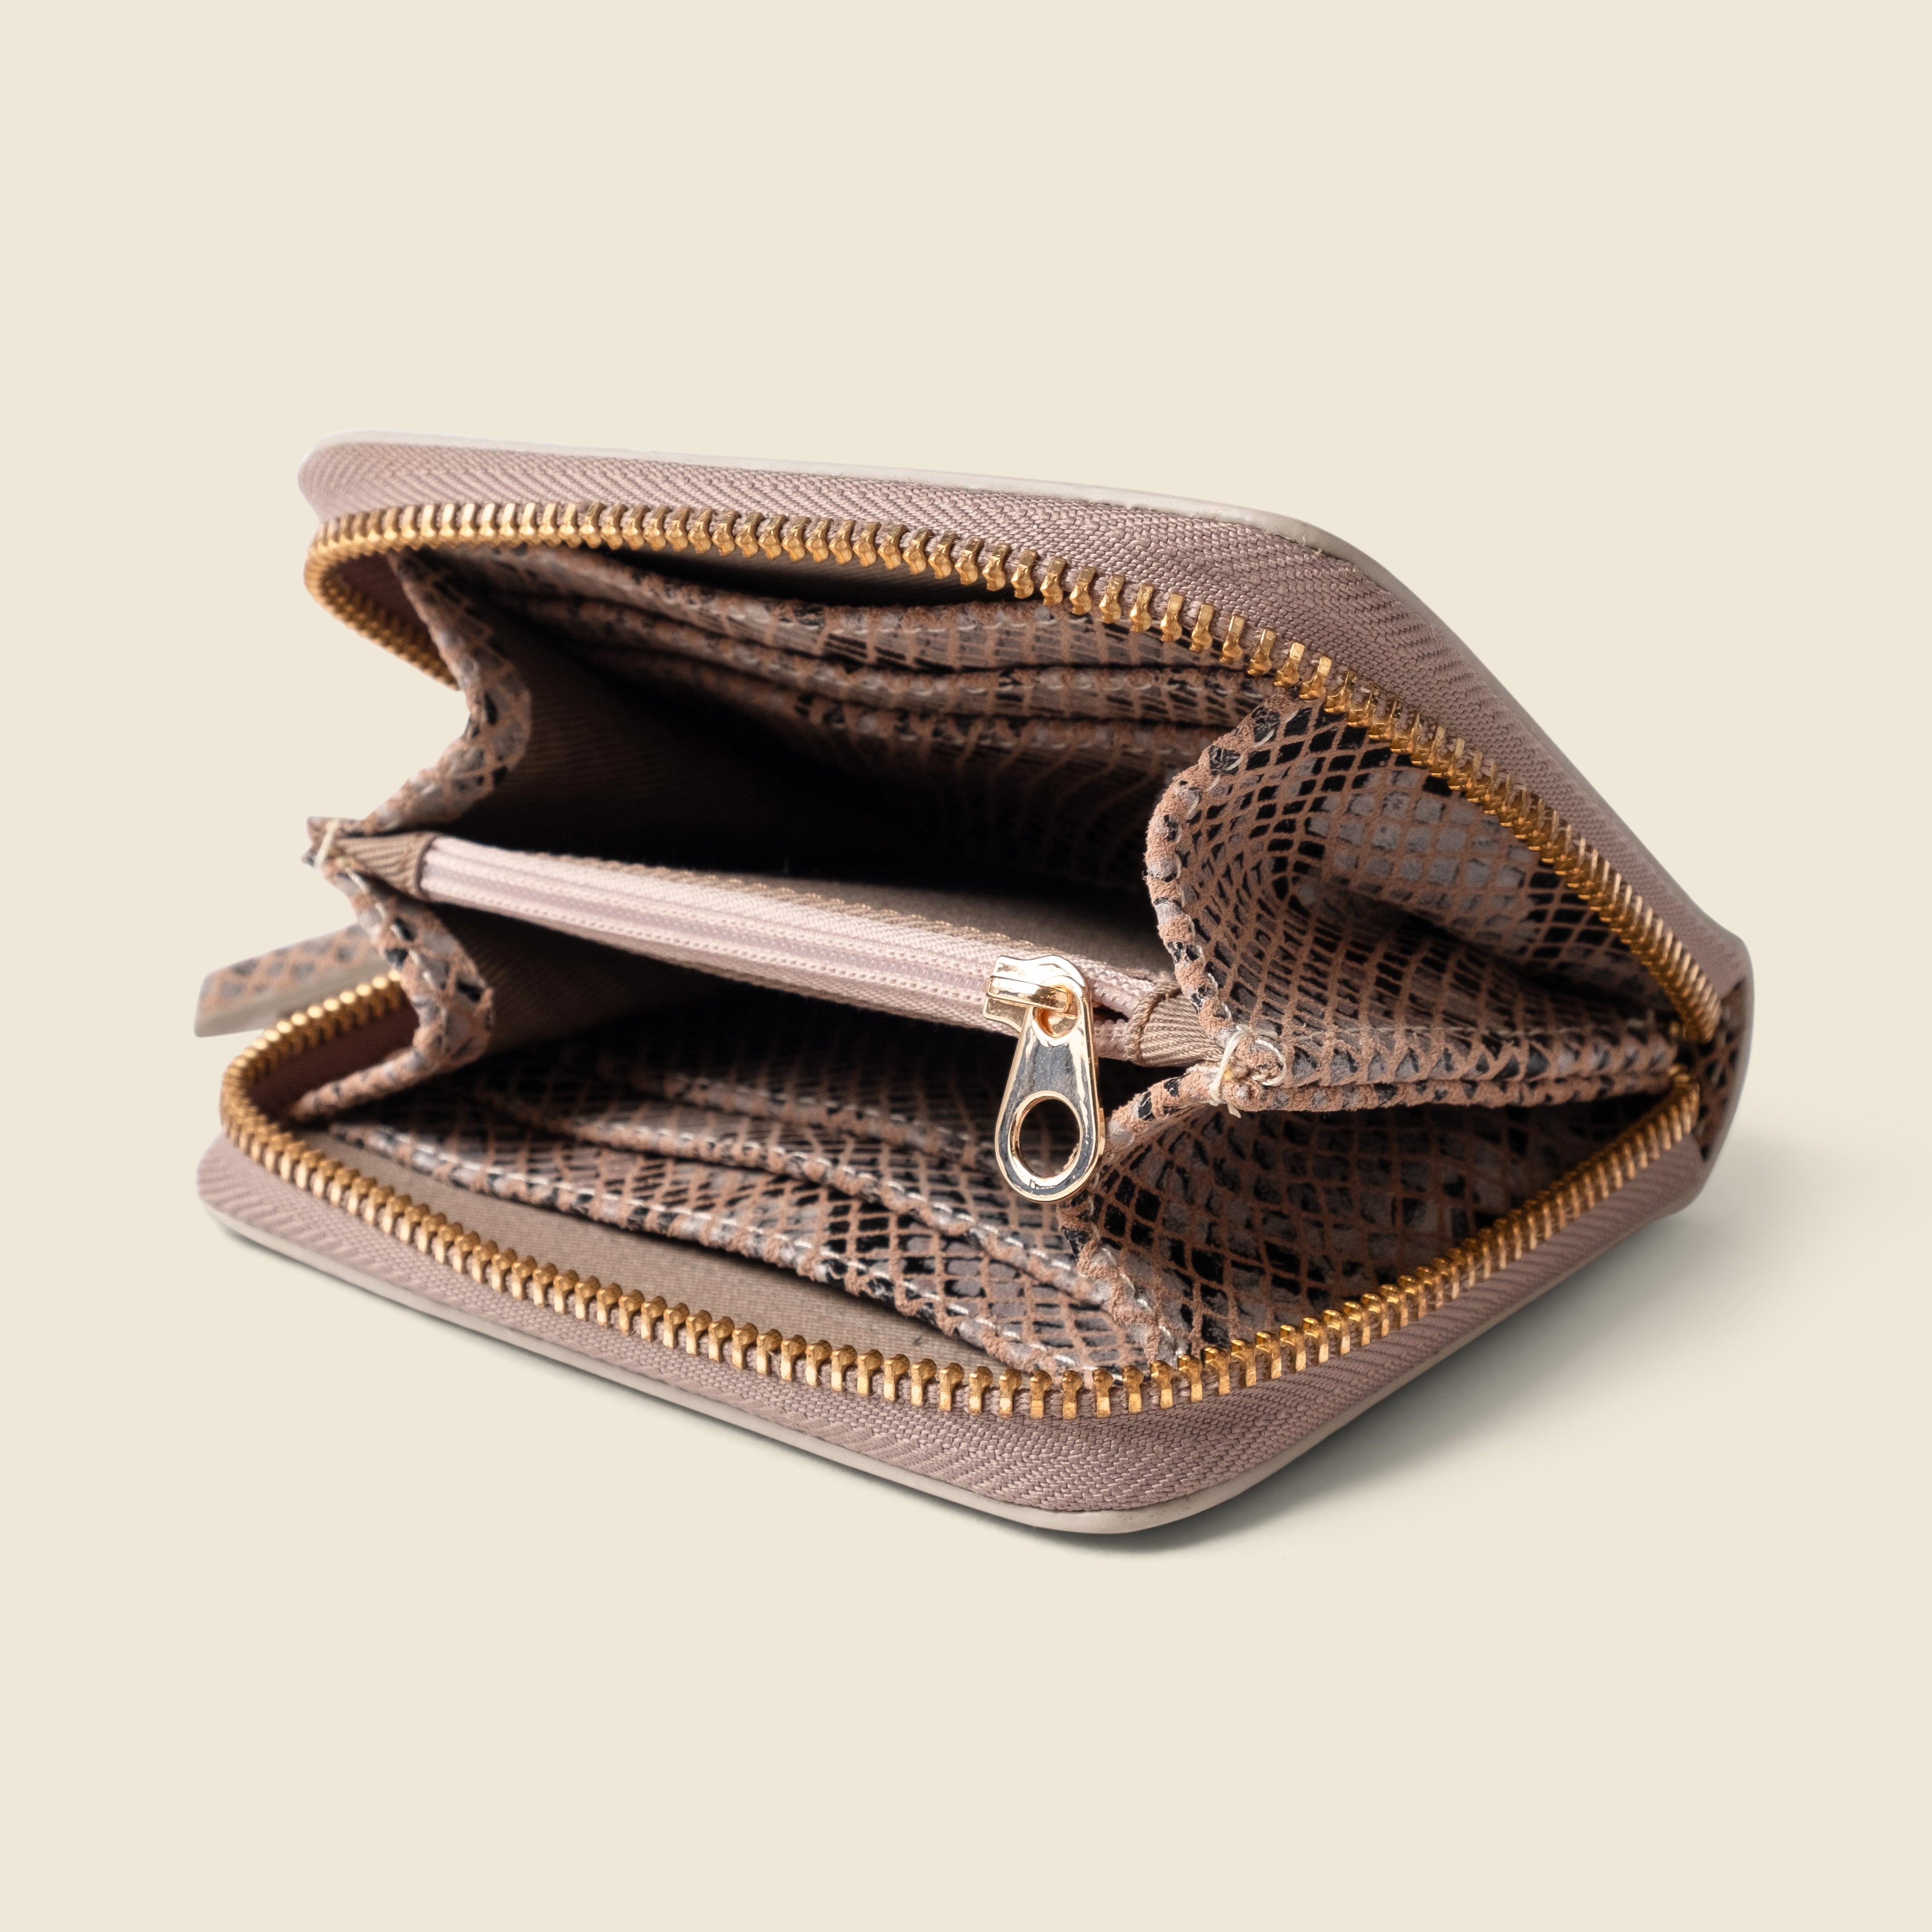 zipper wallet for women - corporate gifts and private label